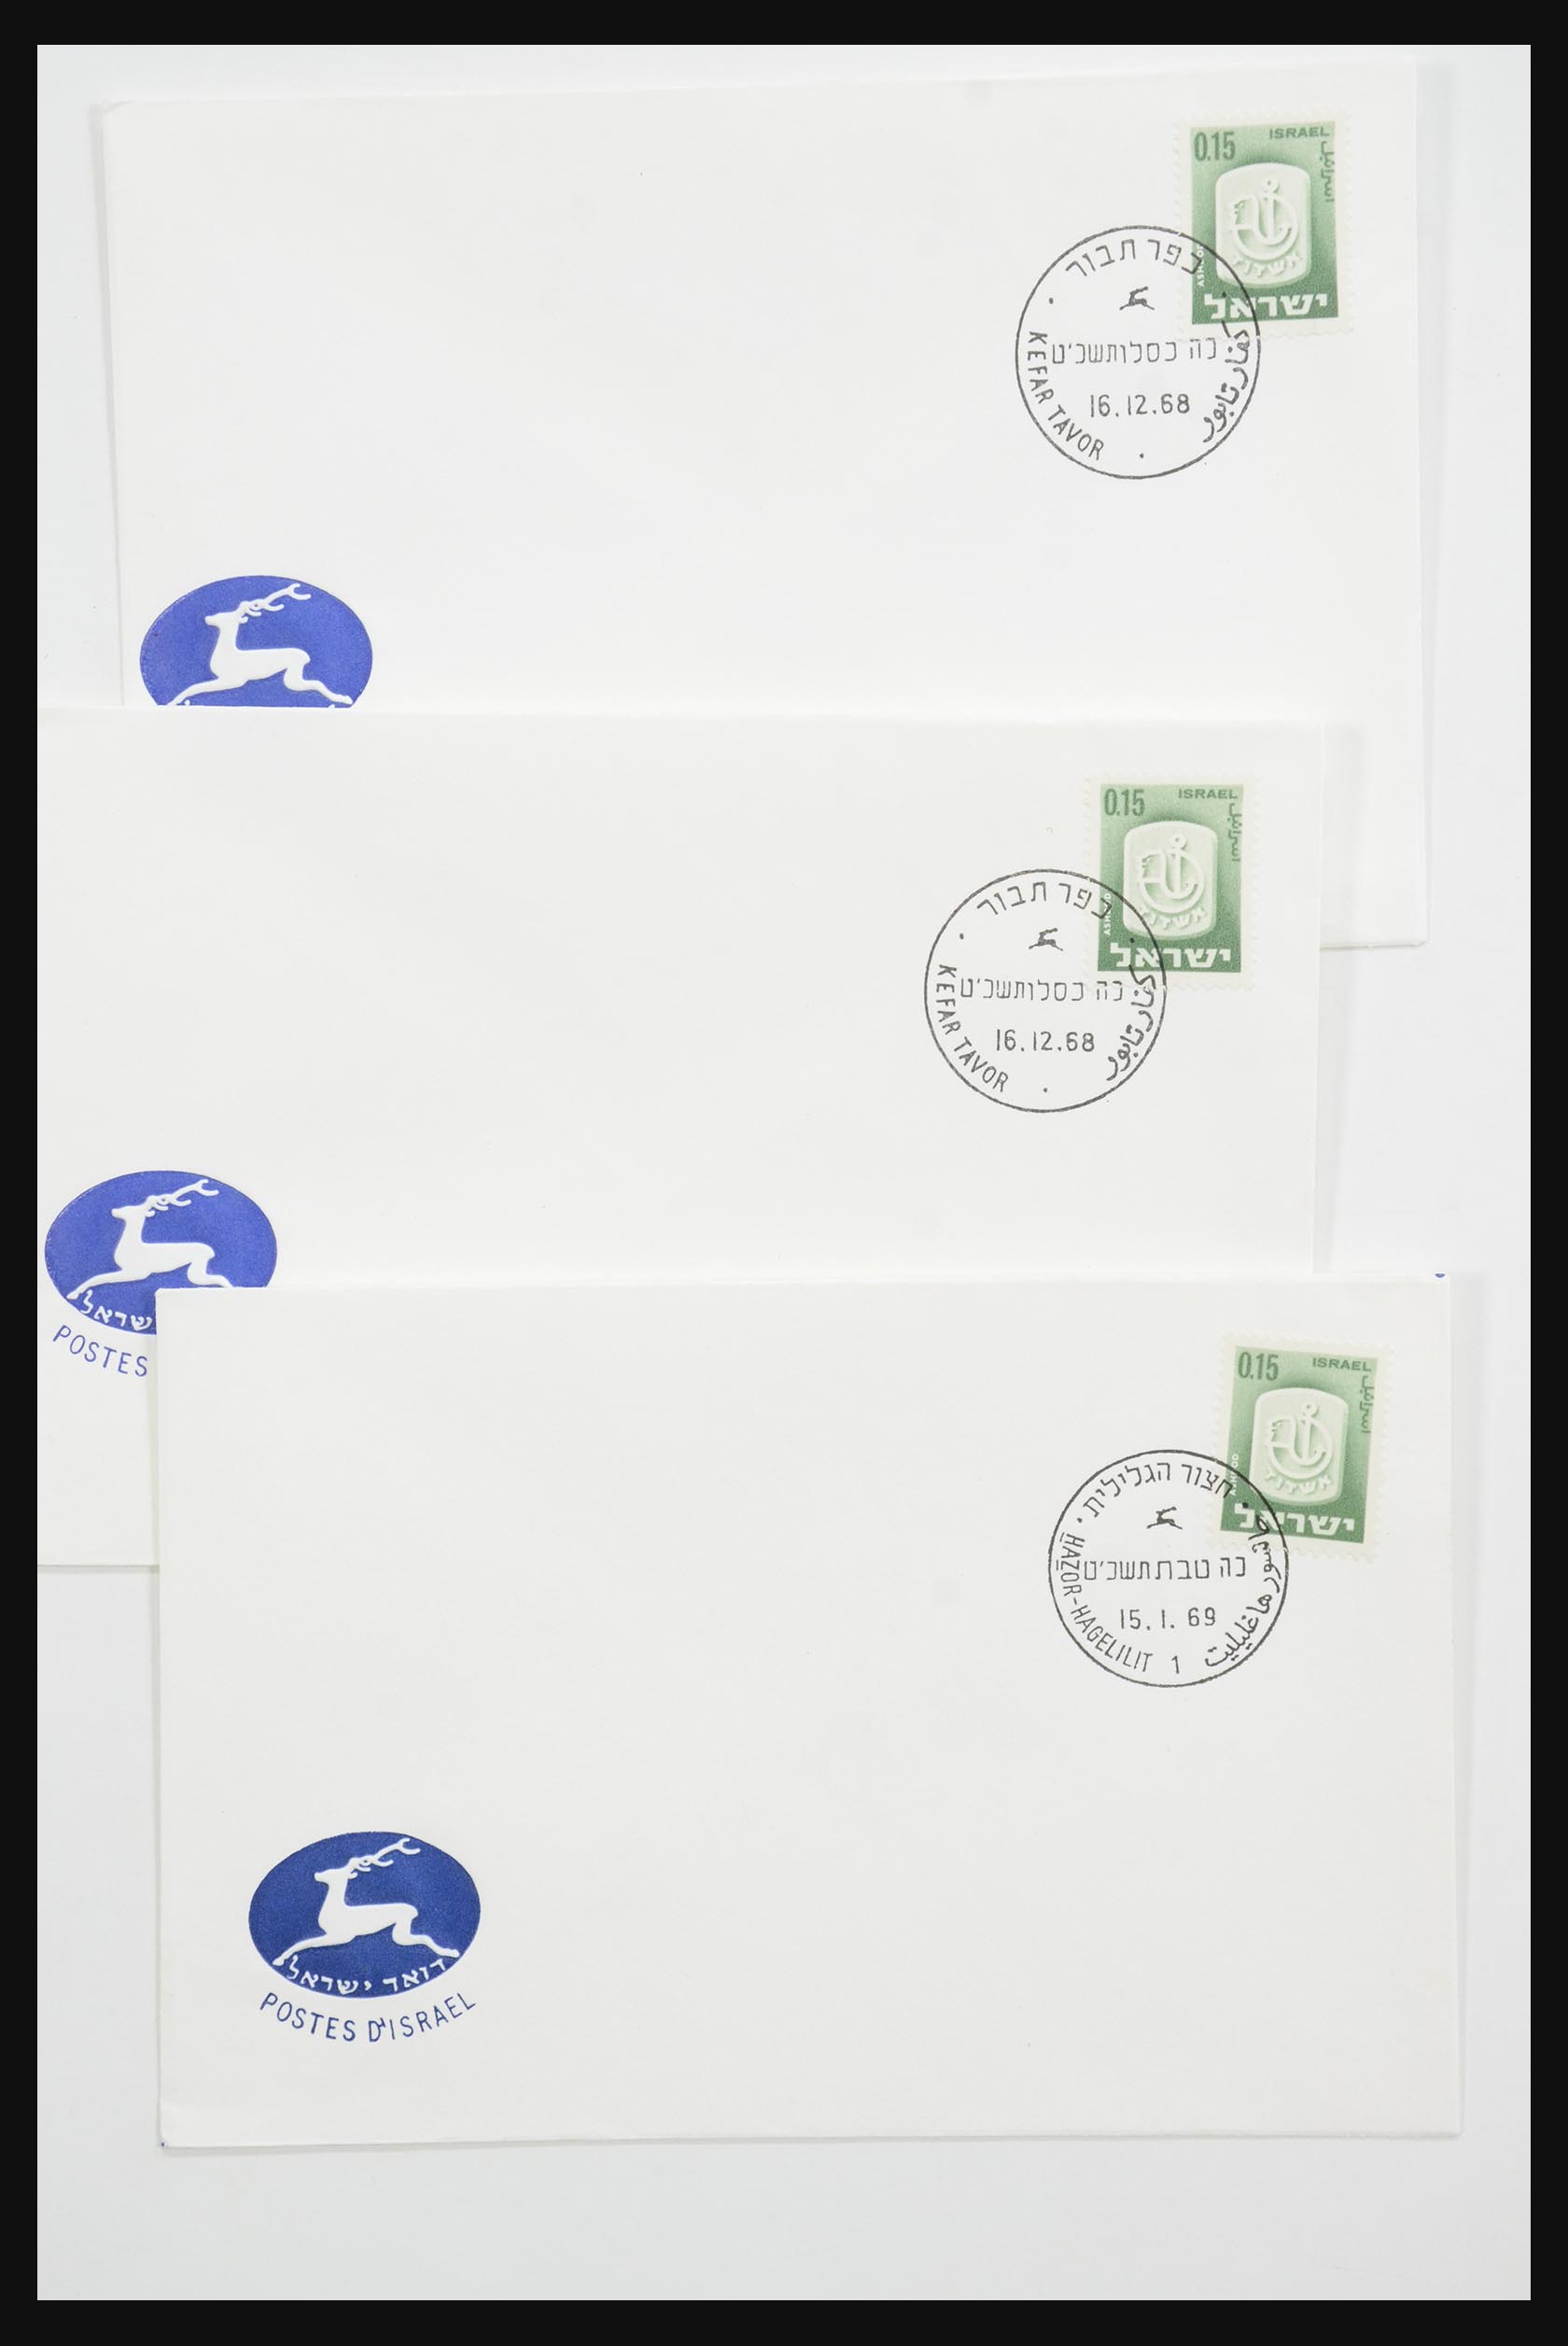 31924 096 - 31924 Israel first day cover collection 1957-2003.